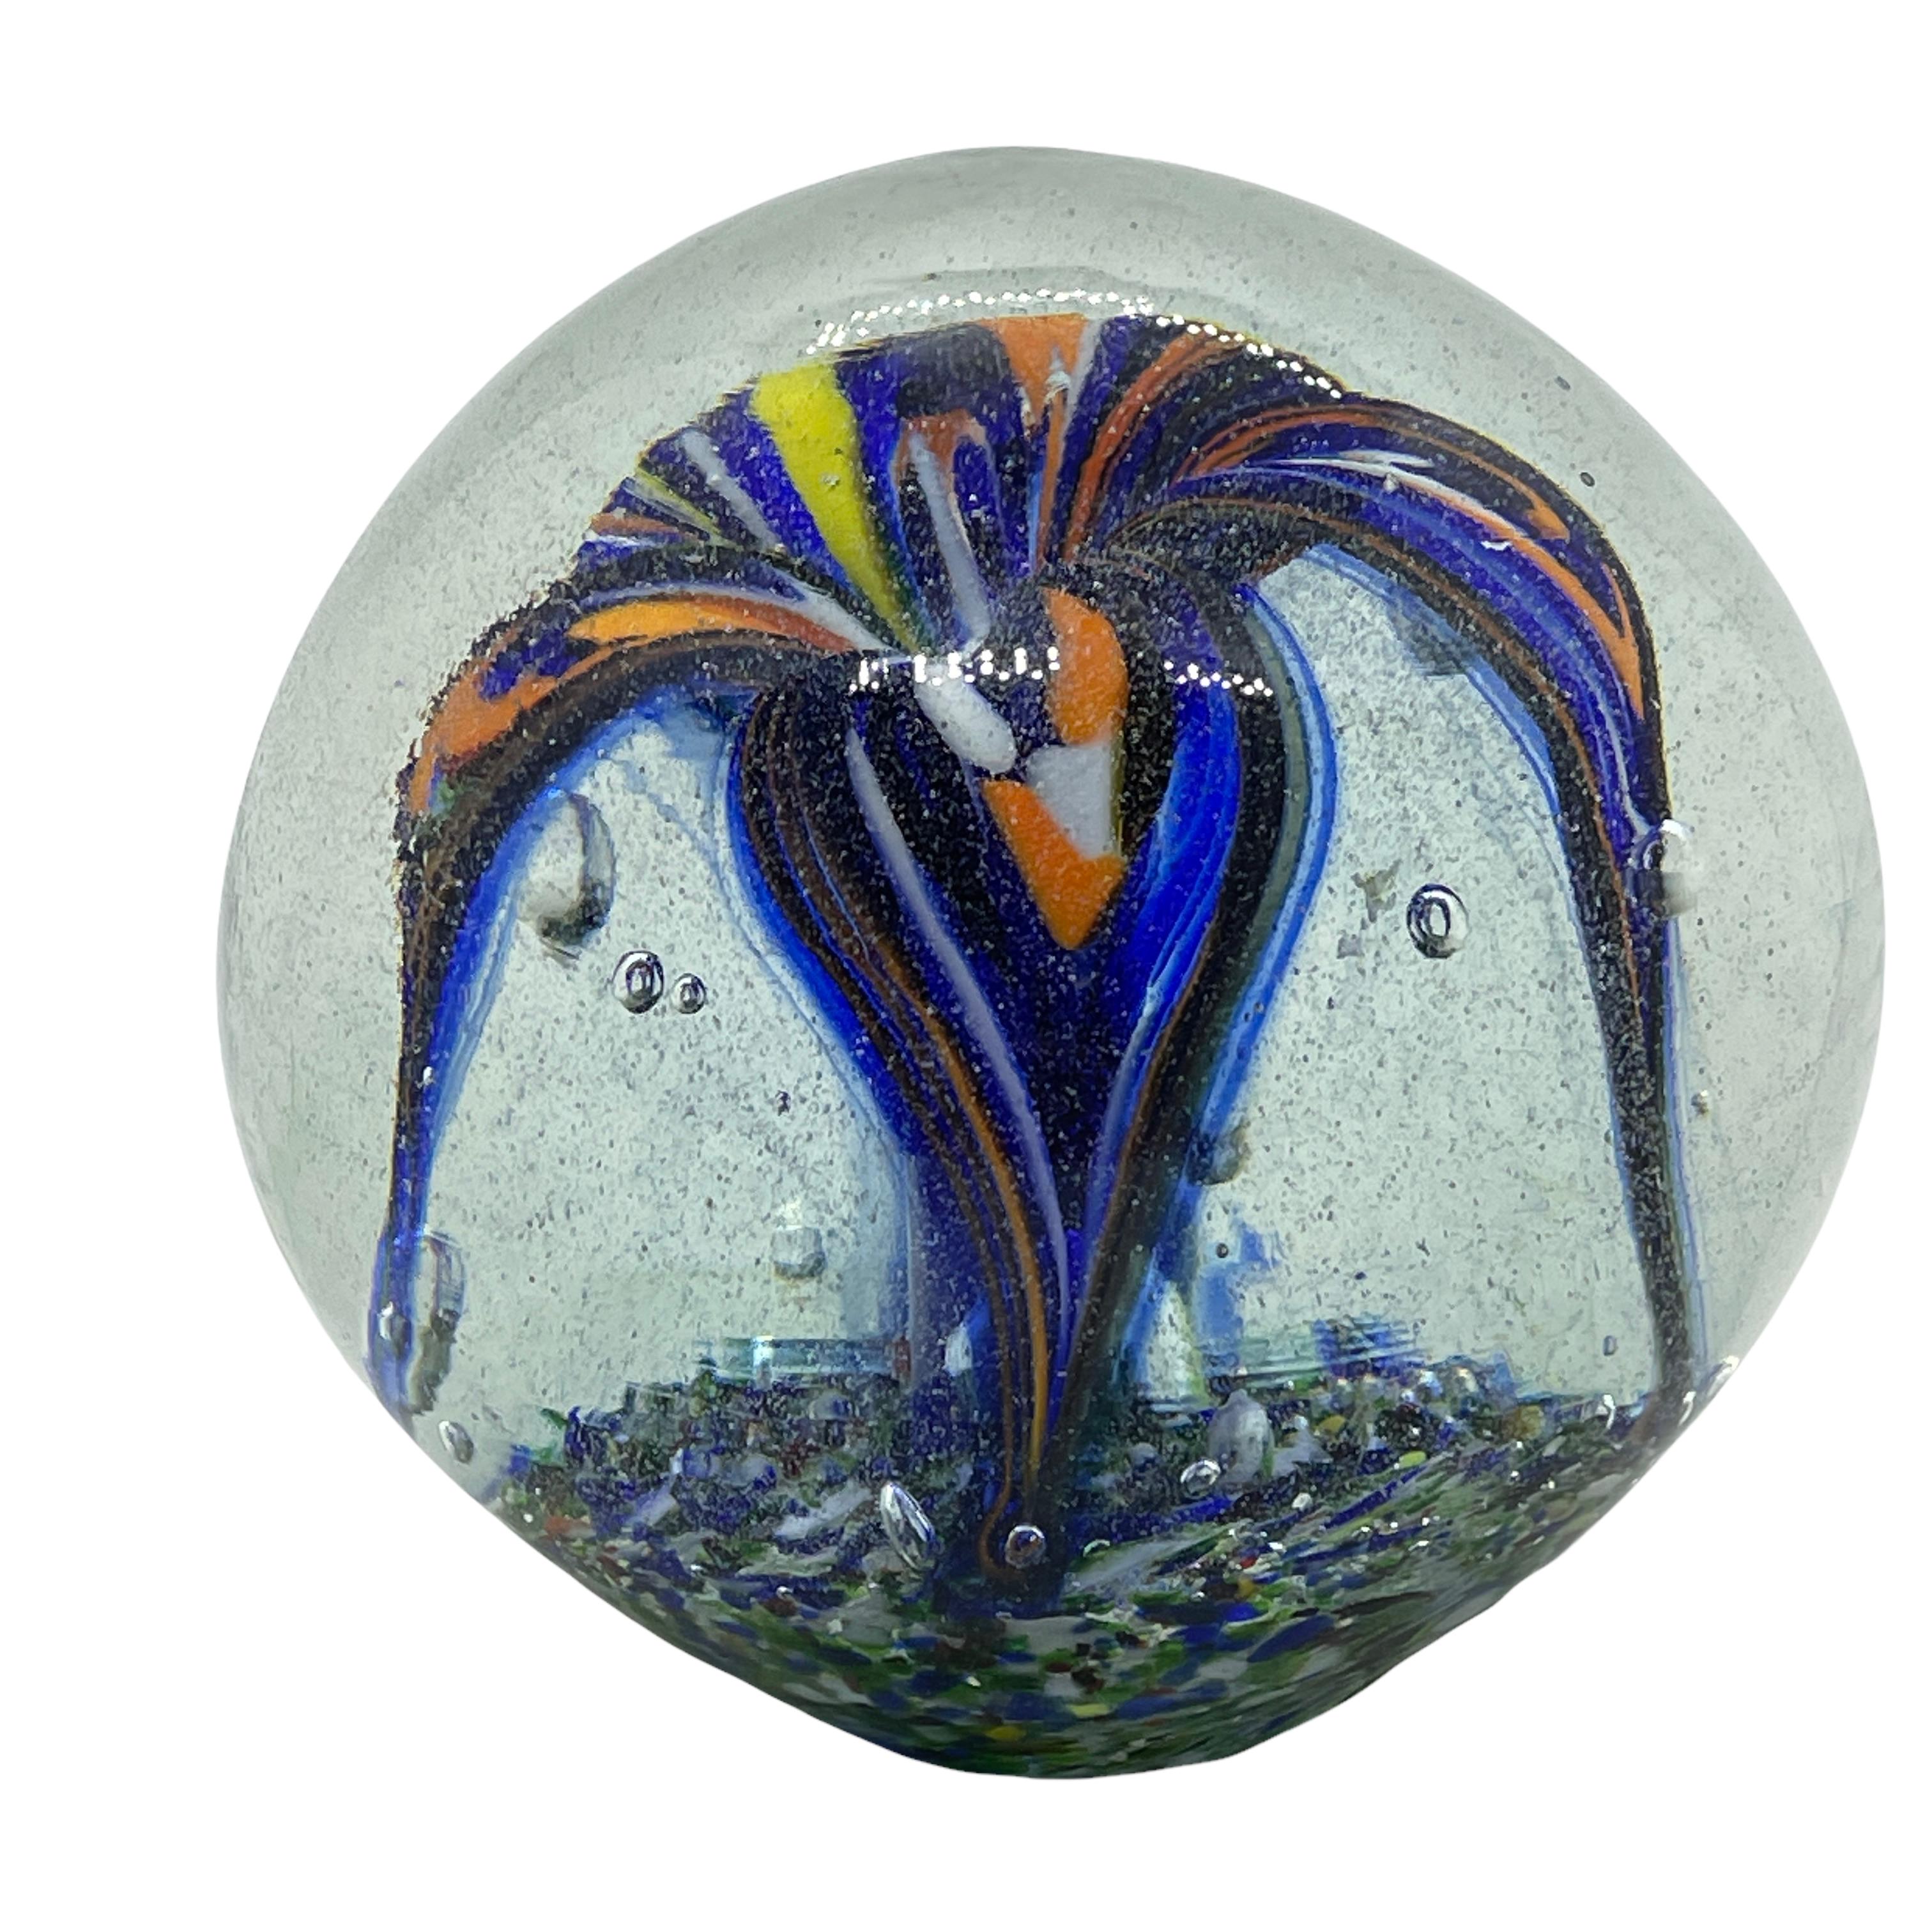 Beautiful Murano hand blown Italian art glass paper weight. Showing a flower inside, in different colors, floating on controlled bubbles. Colors are a green, orange, yellow, blue, black and white. A beautiful nice addition to your desktop.